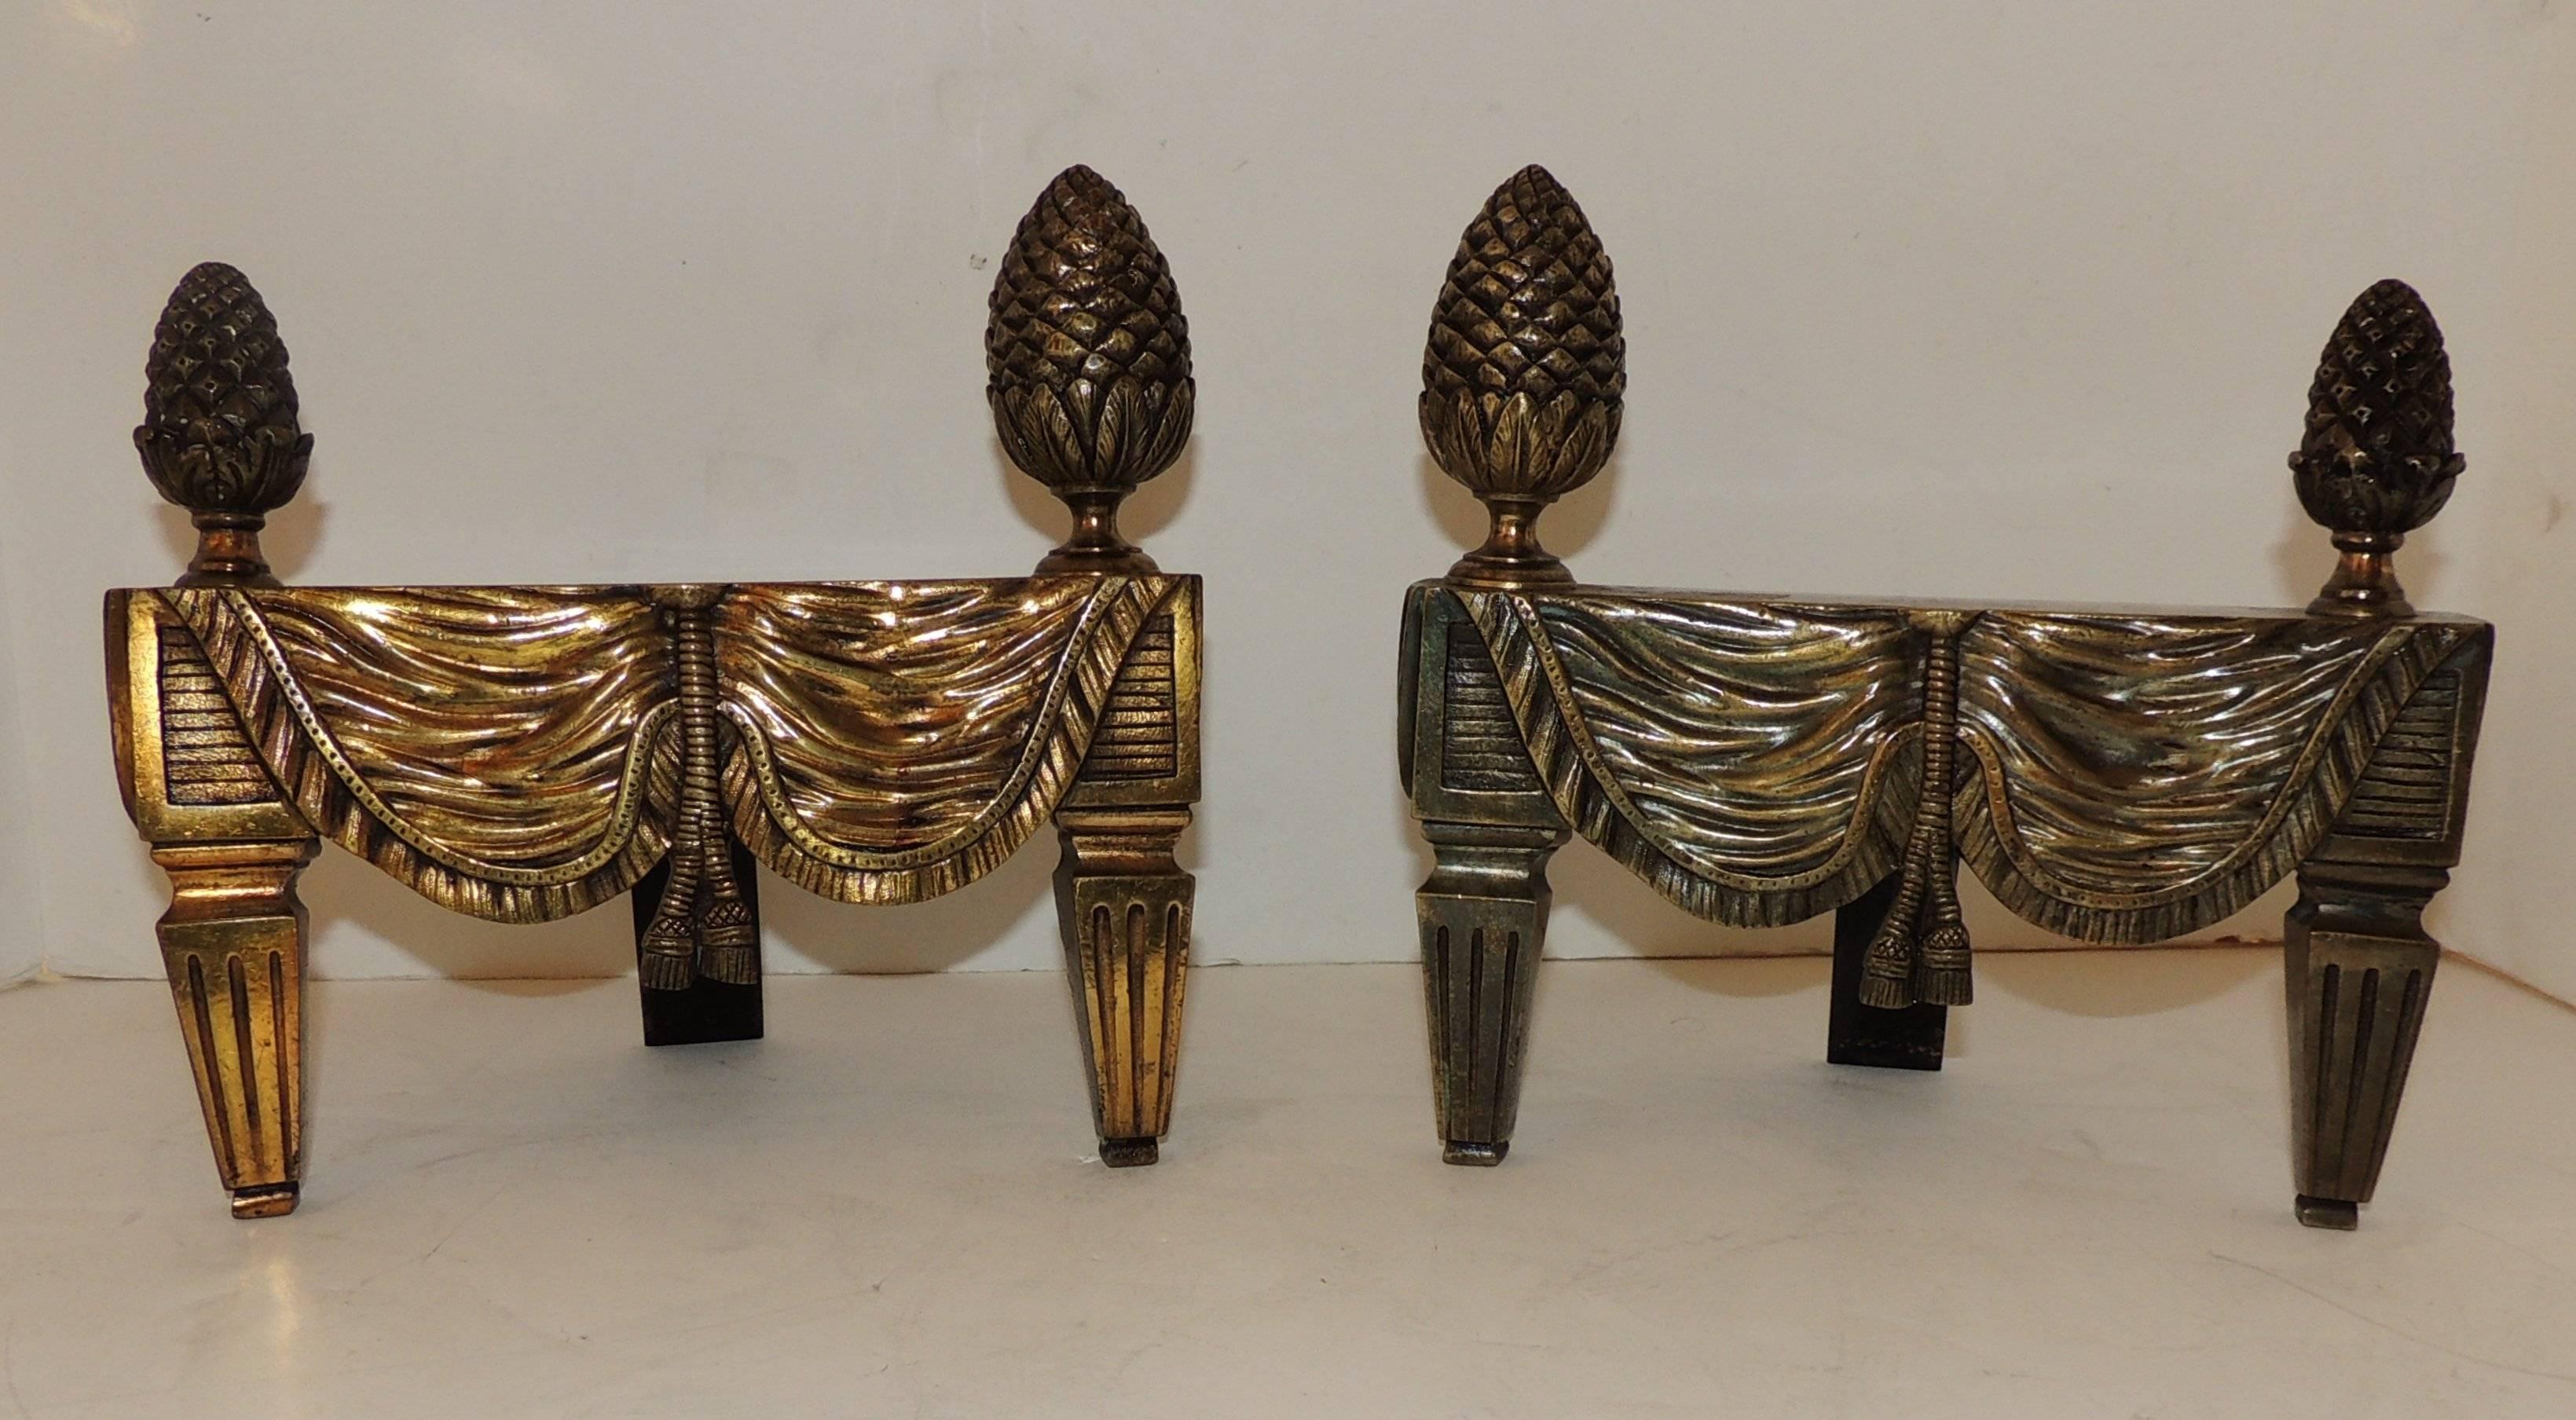 Wonderful French bronze neoclassical fireplace draped fabric chenets andirons finished by Large Acorn finials.

Measures: 8" H x 8.5" W x4" D.

 